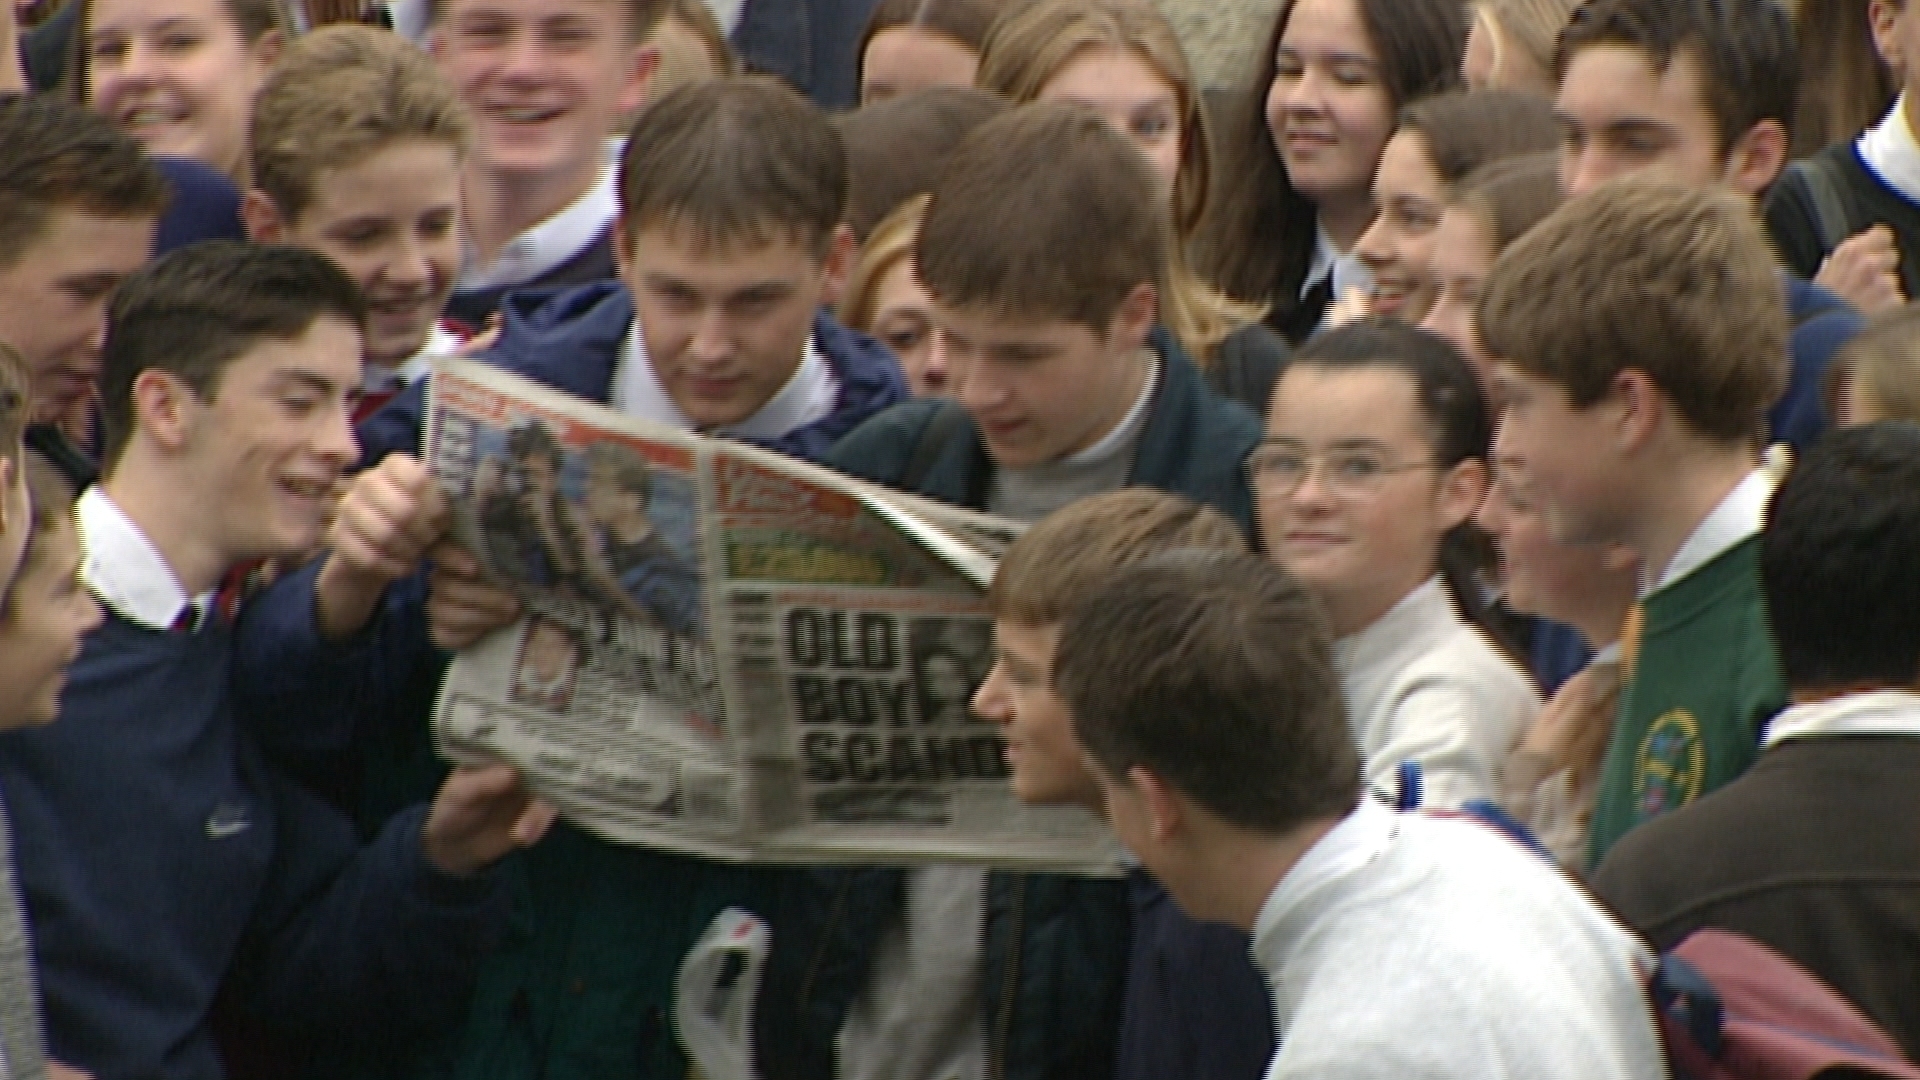 Pupils at Bearsden Academy learn the truth about their classmate.